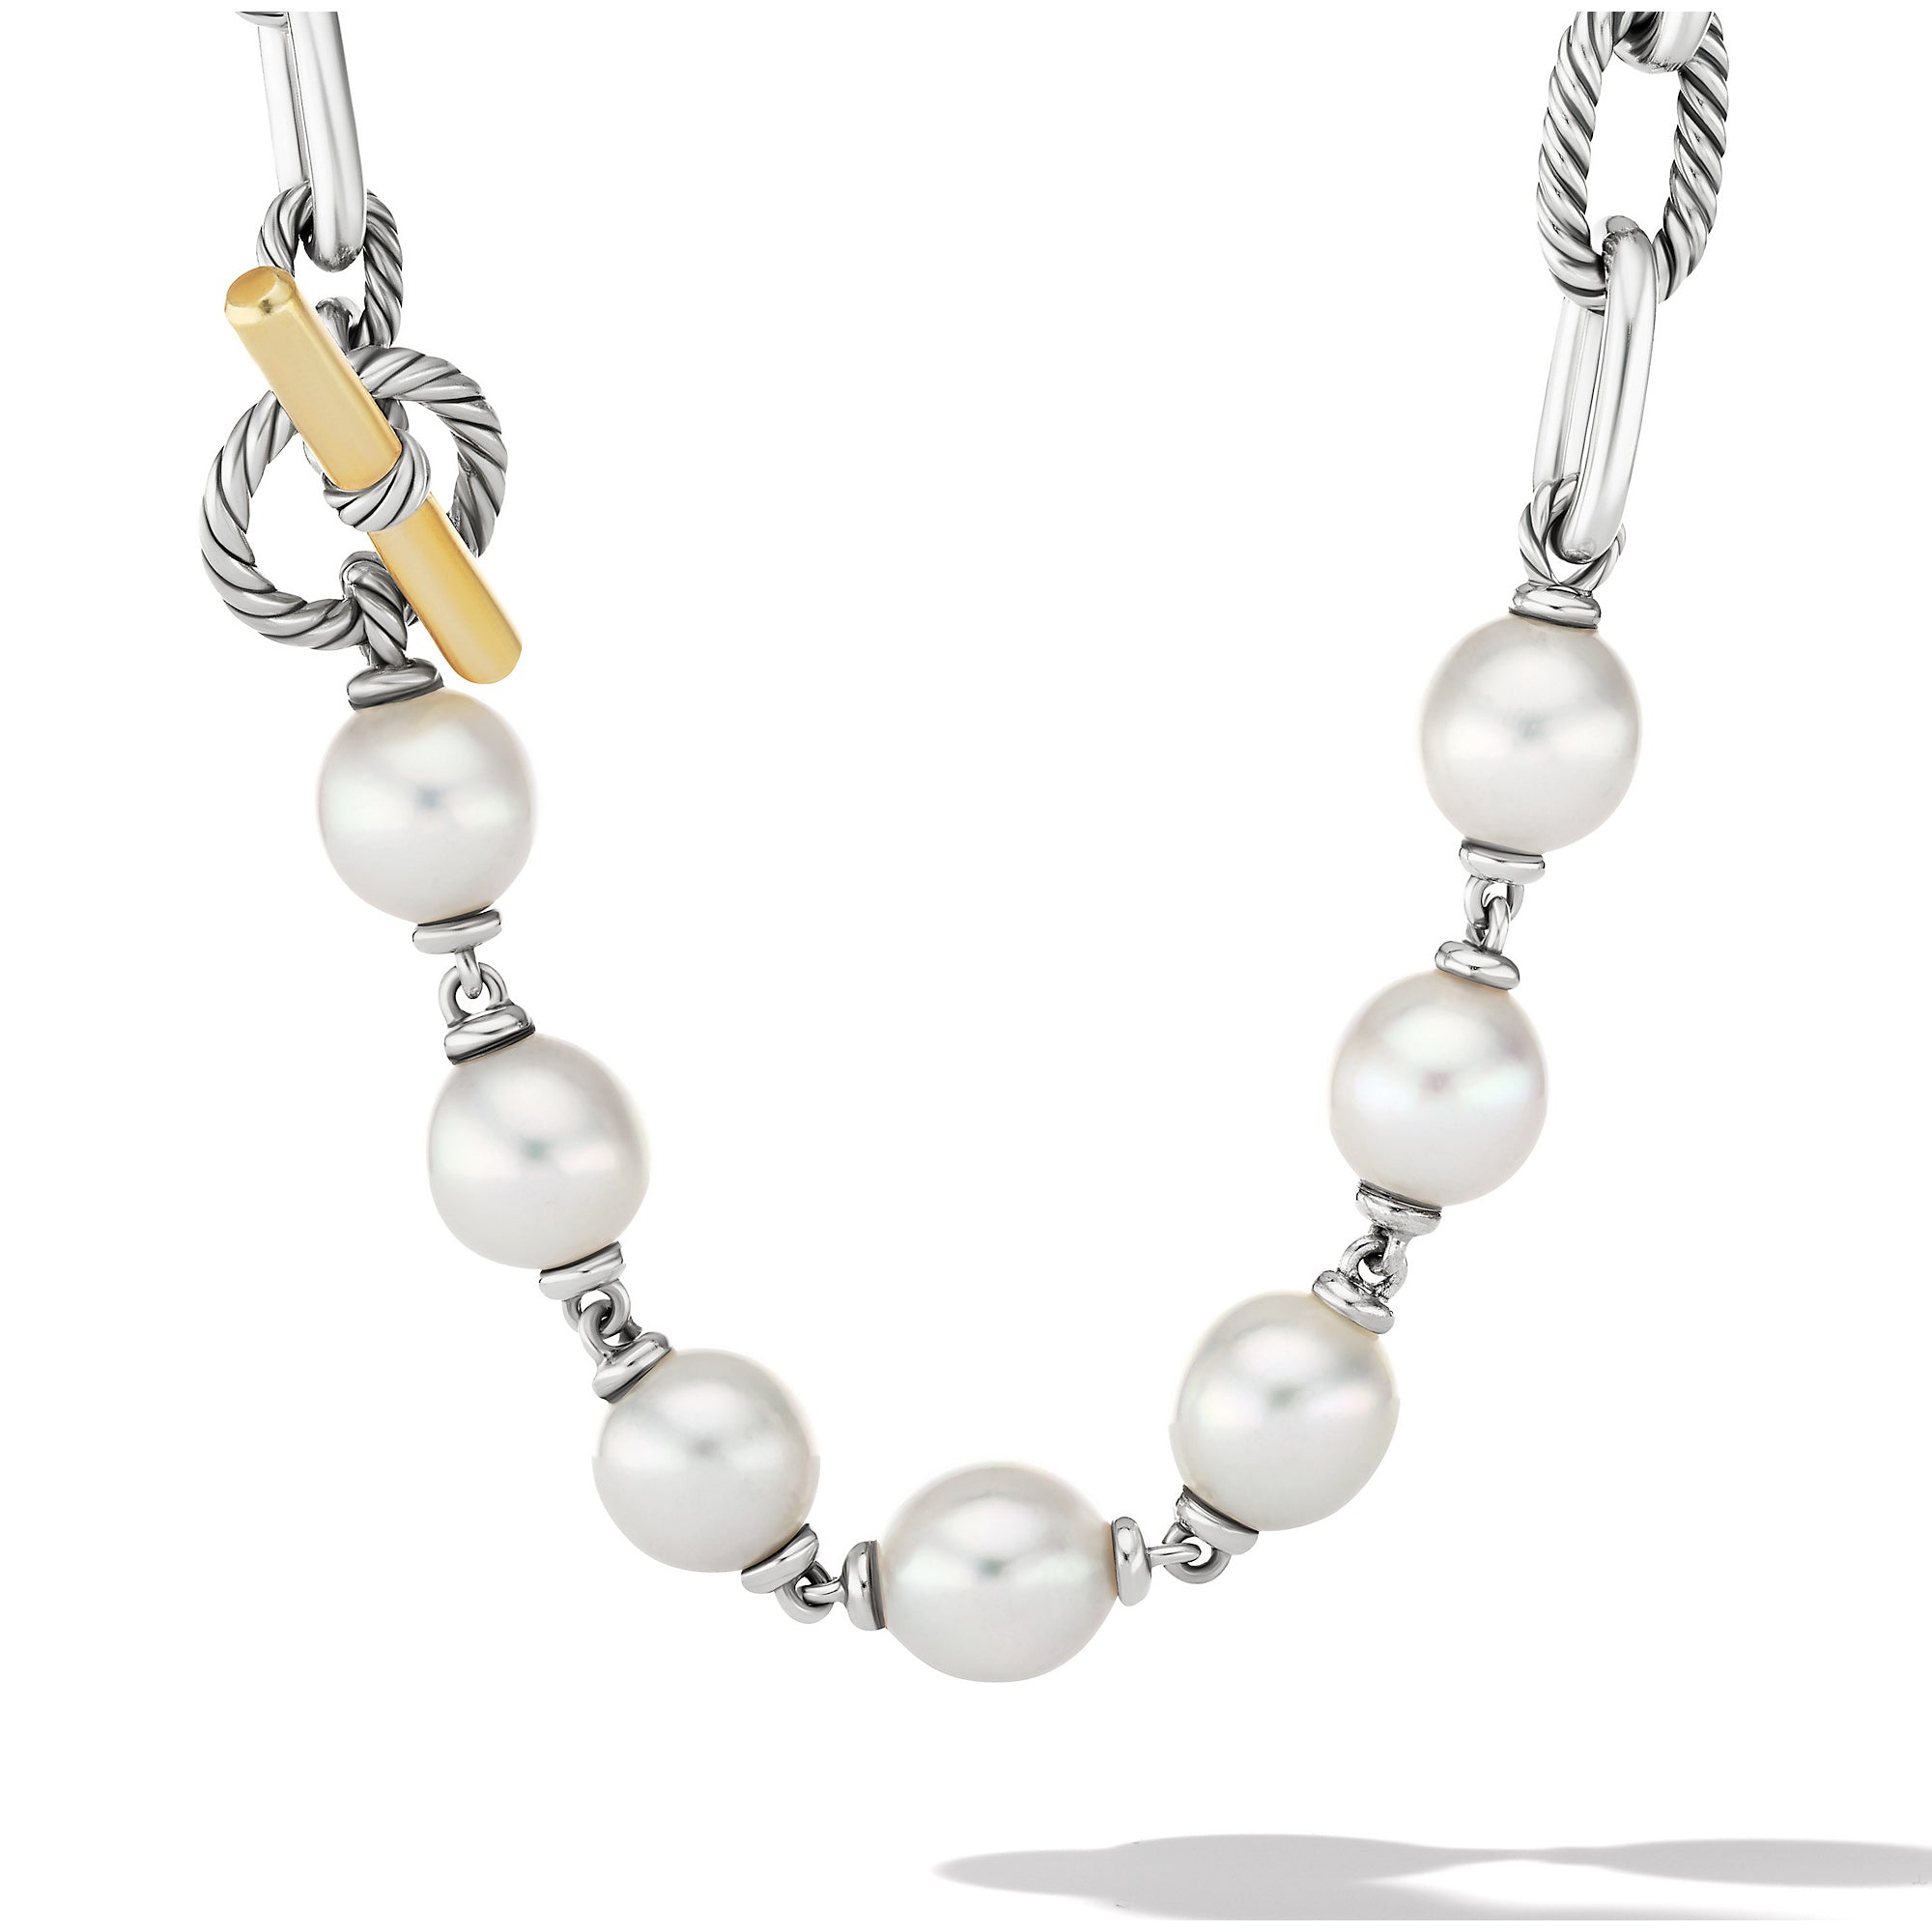 Pearls Are In! Local Pearl Accessories at David's Jewelry